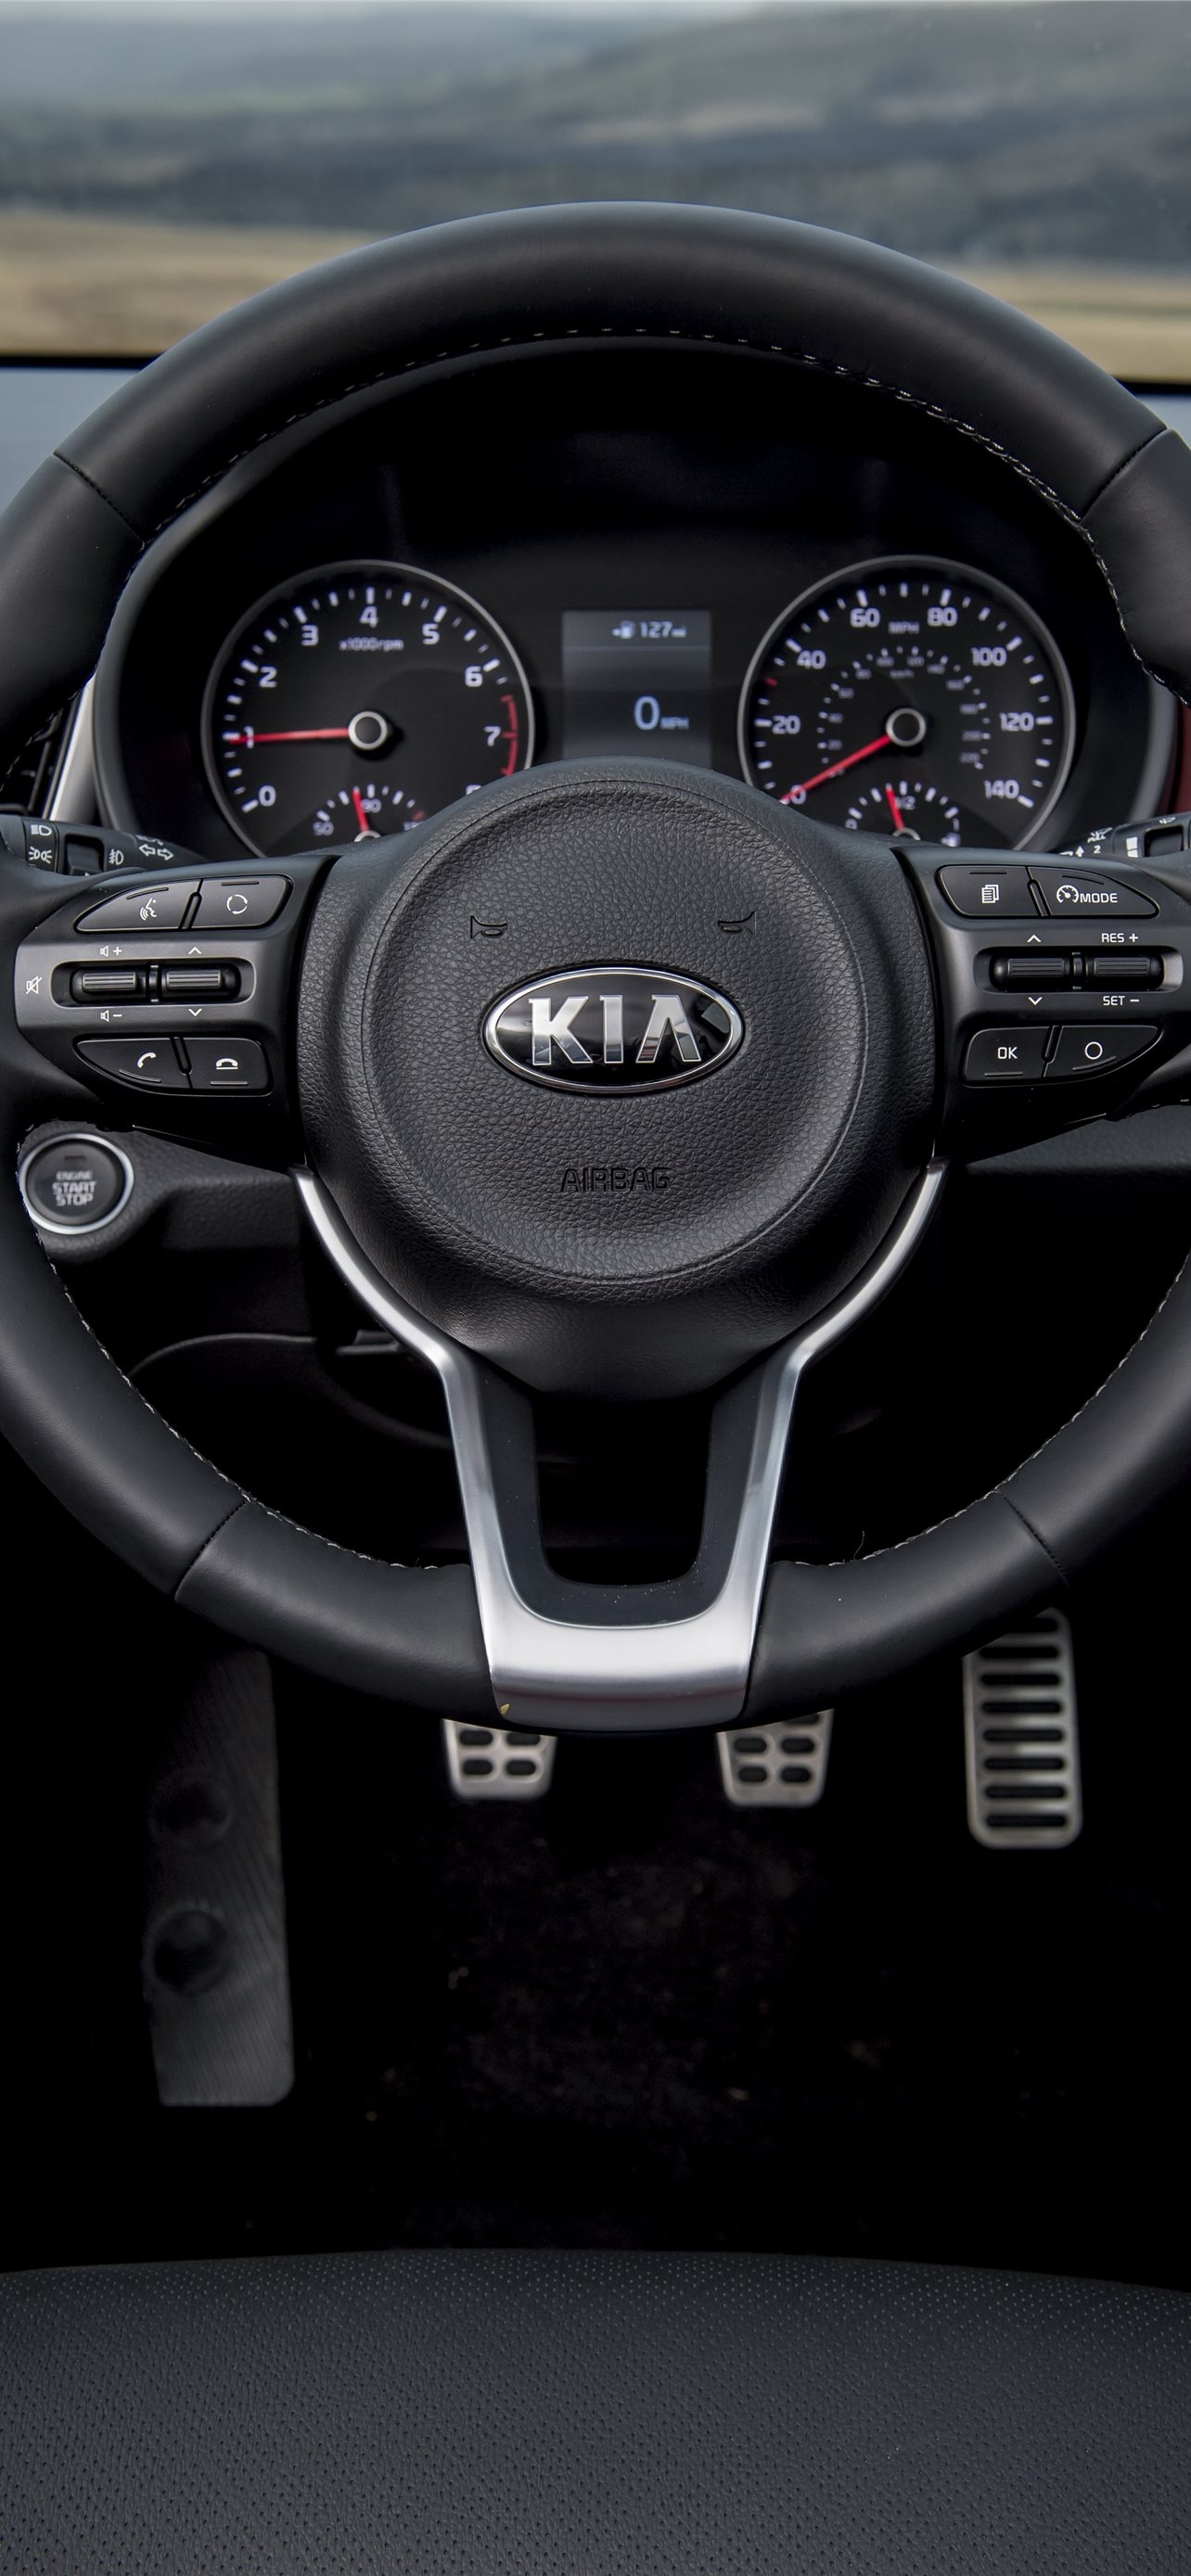 Kia Rio, iPhone wallpapers, Best quality, High definition, 1290x2780 HD Handy